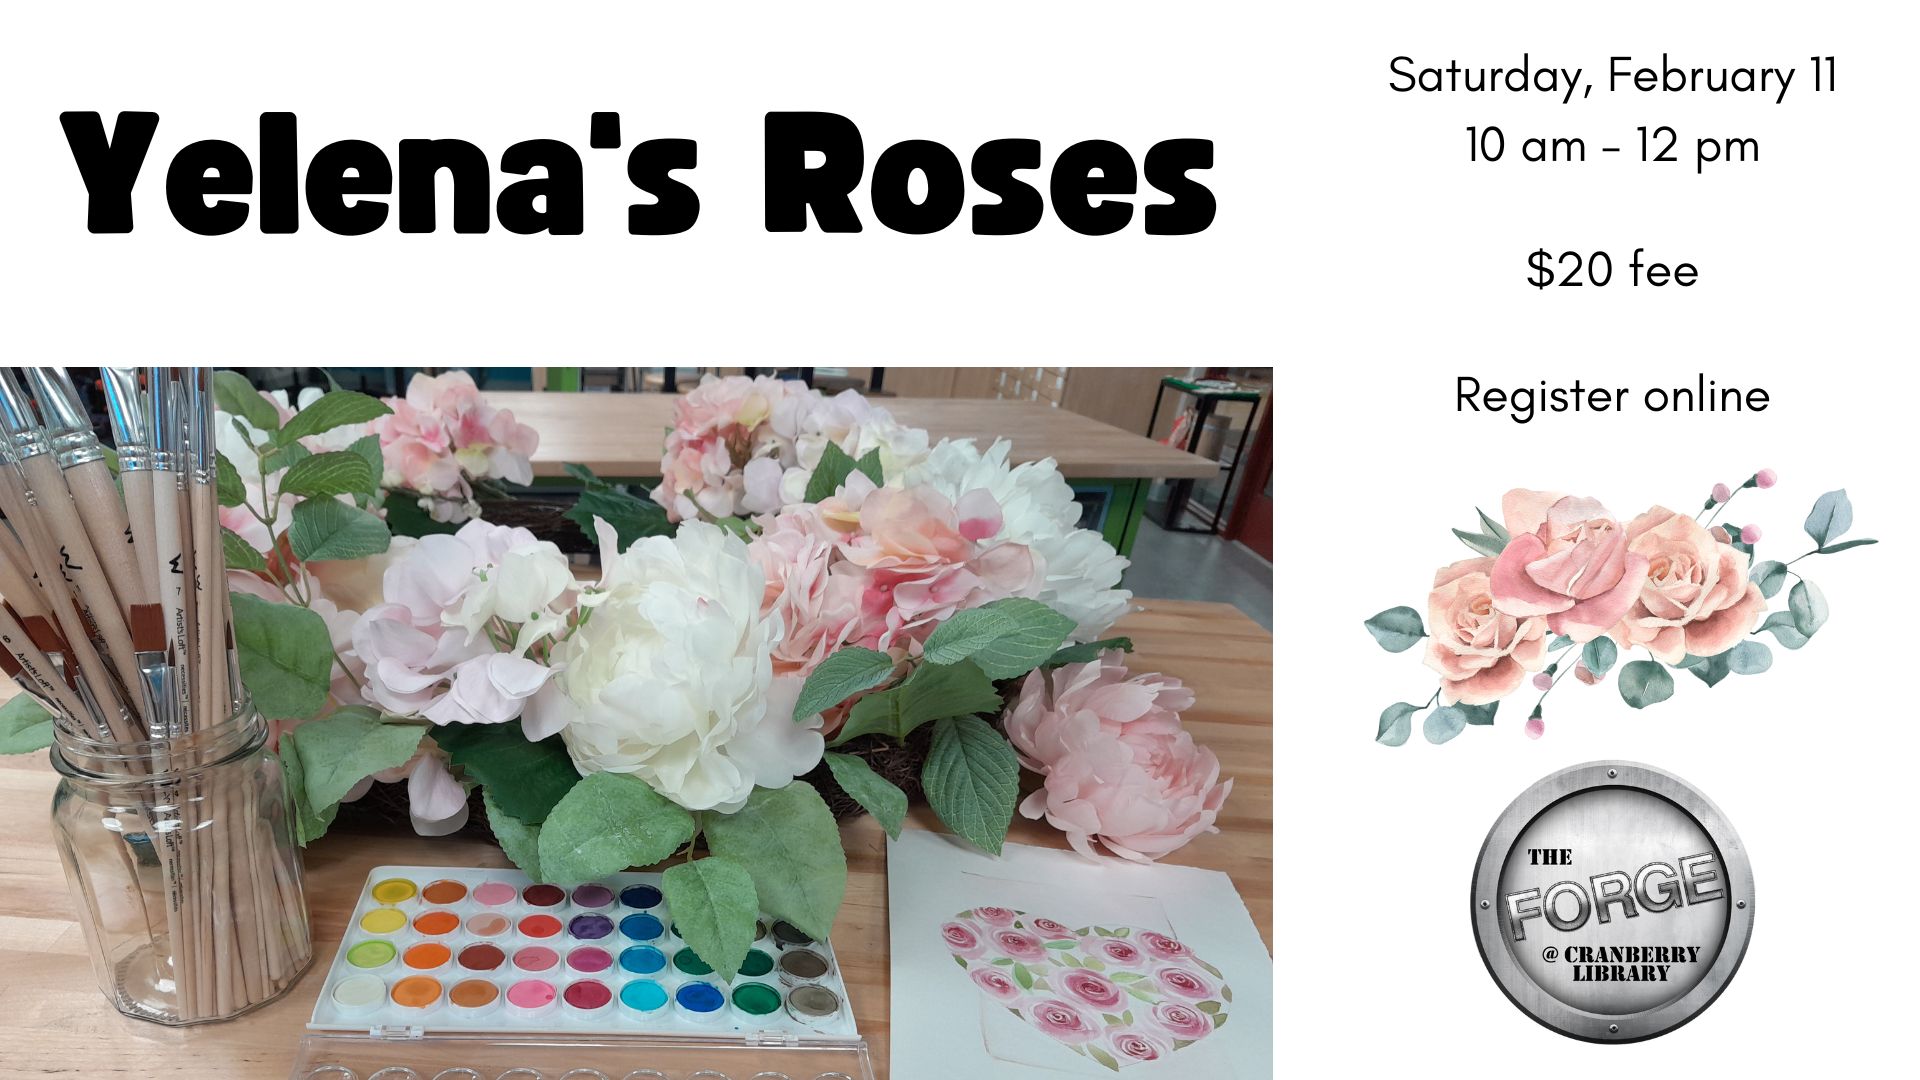 Flyer for Yelena's Roses class with image of roses